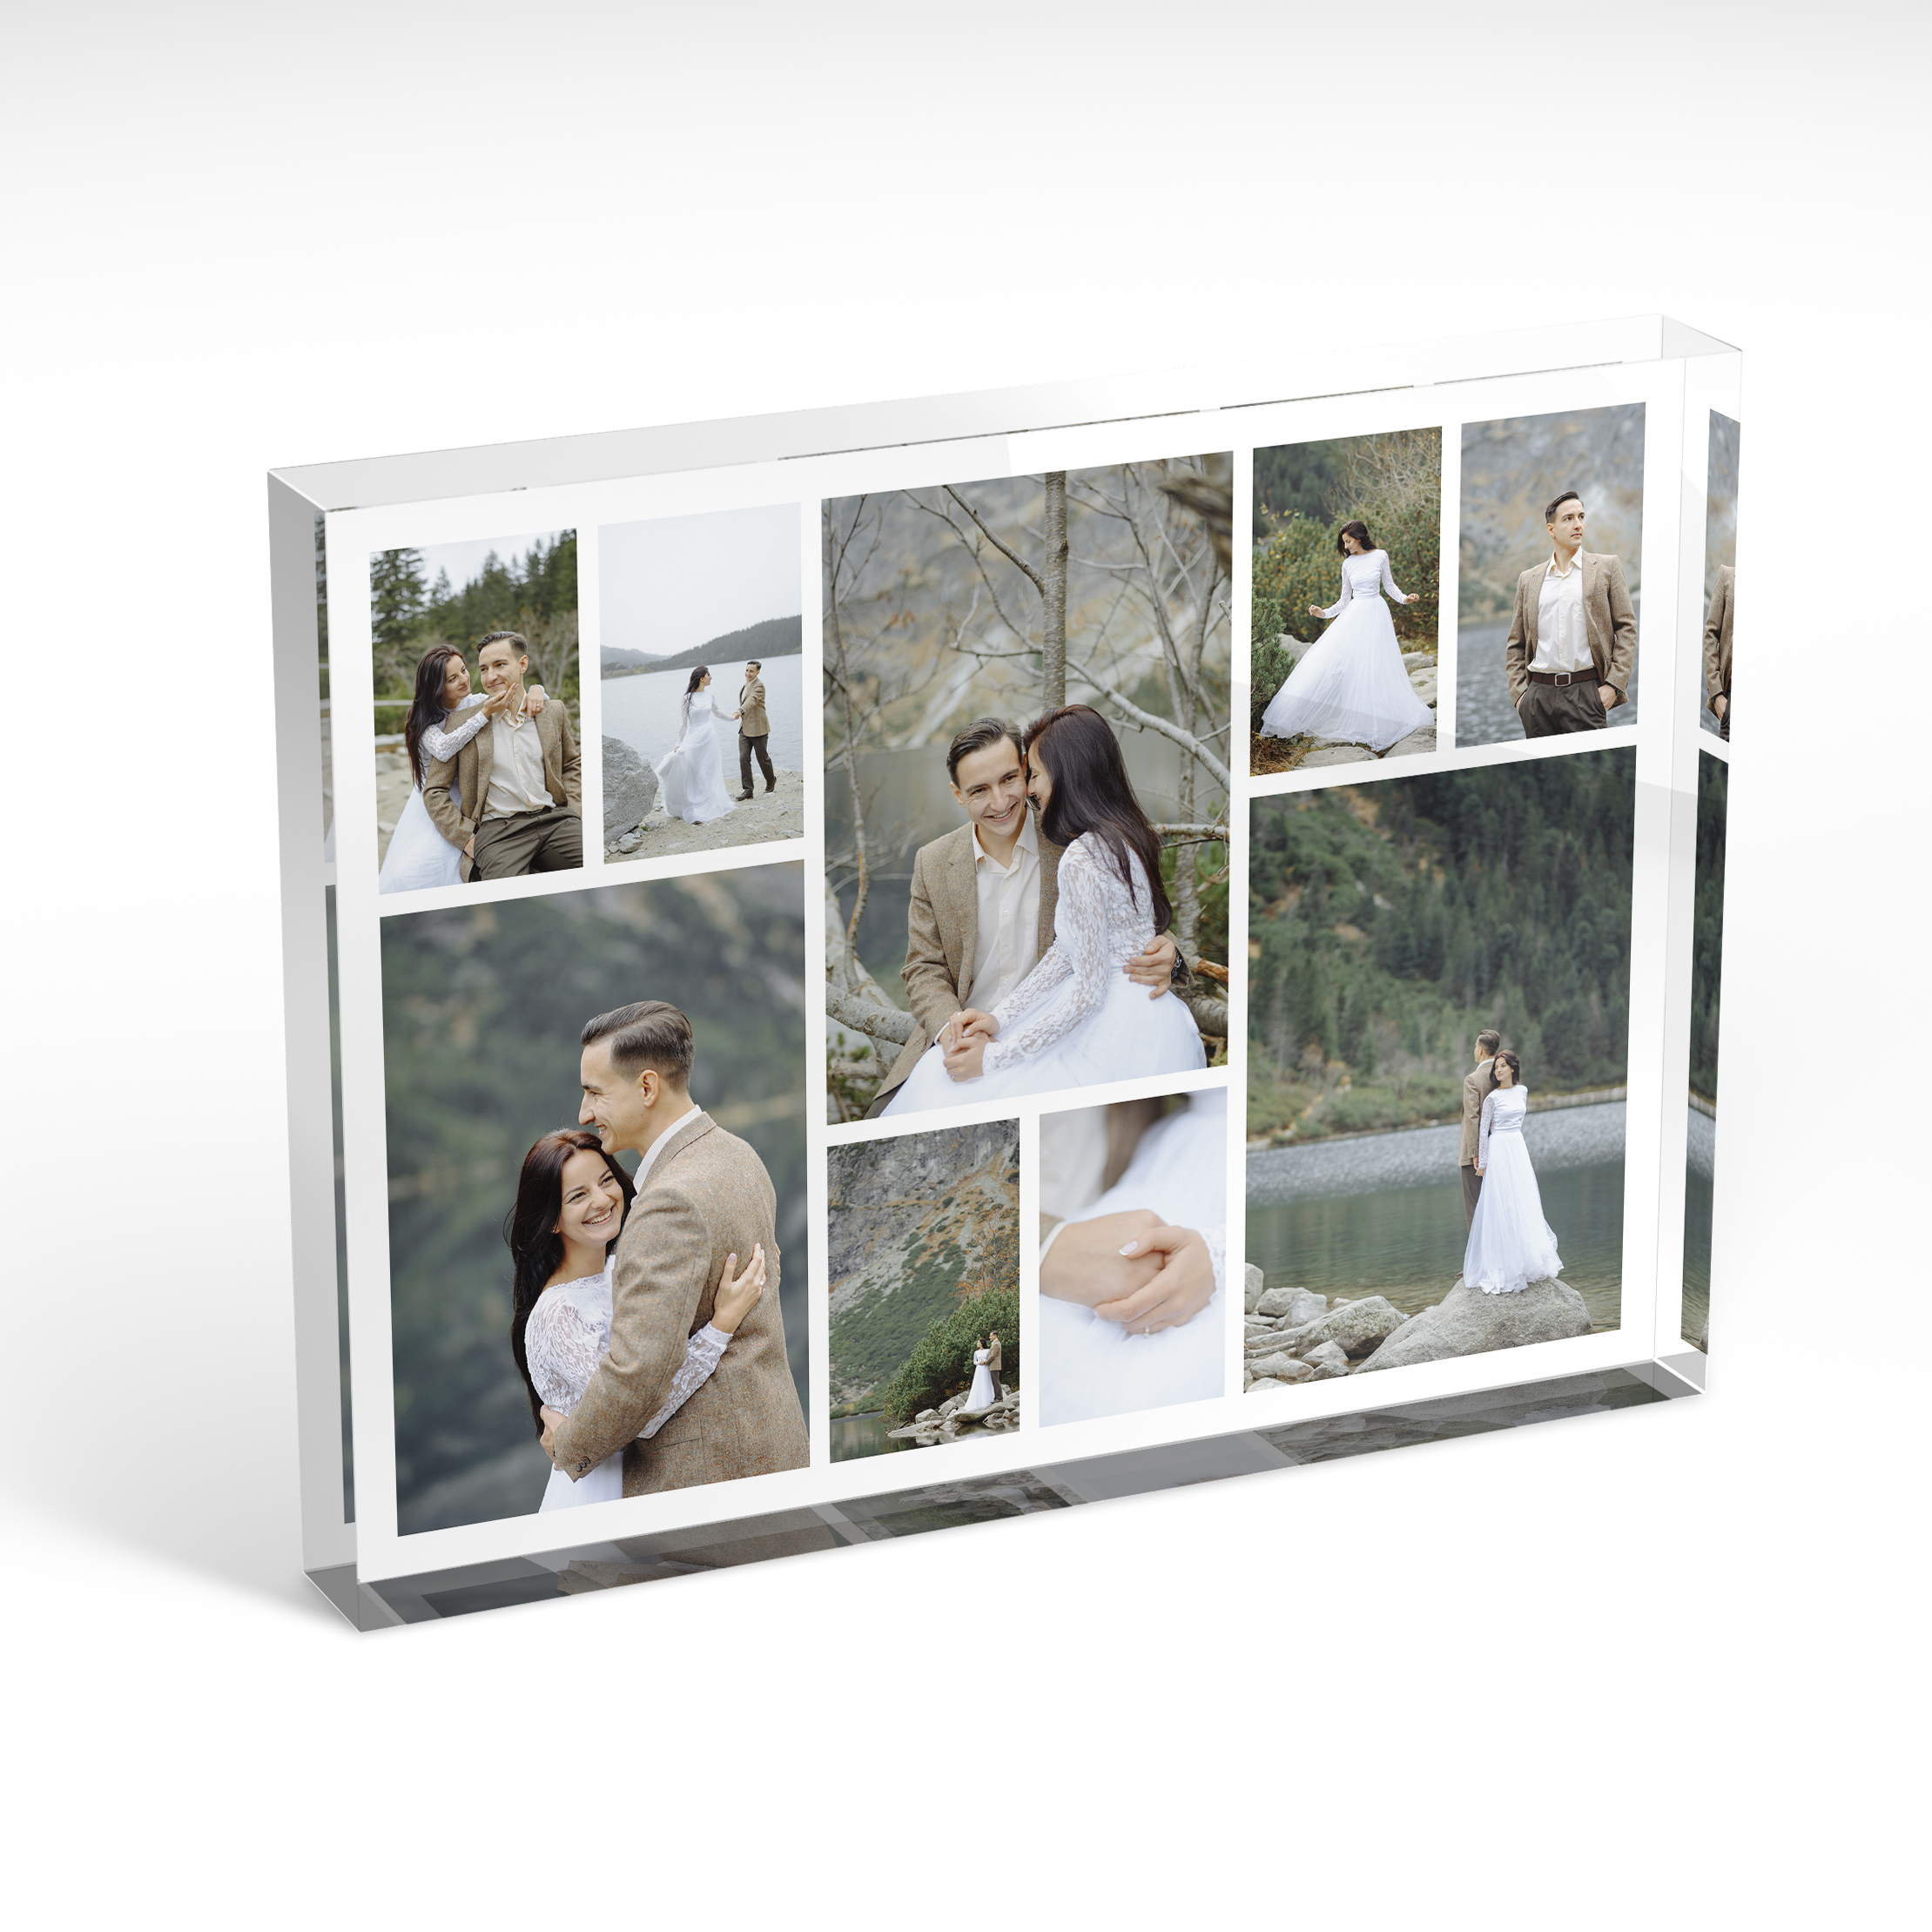 An angled side view of a landscape layout Perspex Photo Blocks with space for 9 photos. Thiis design is named "Spread Montage". 